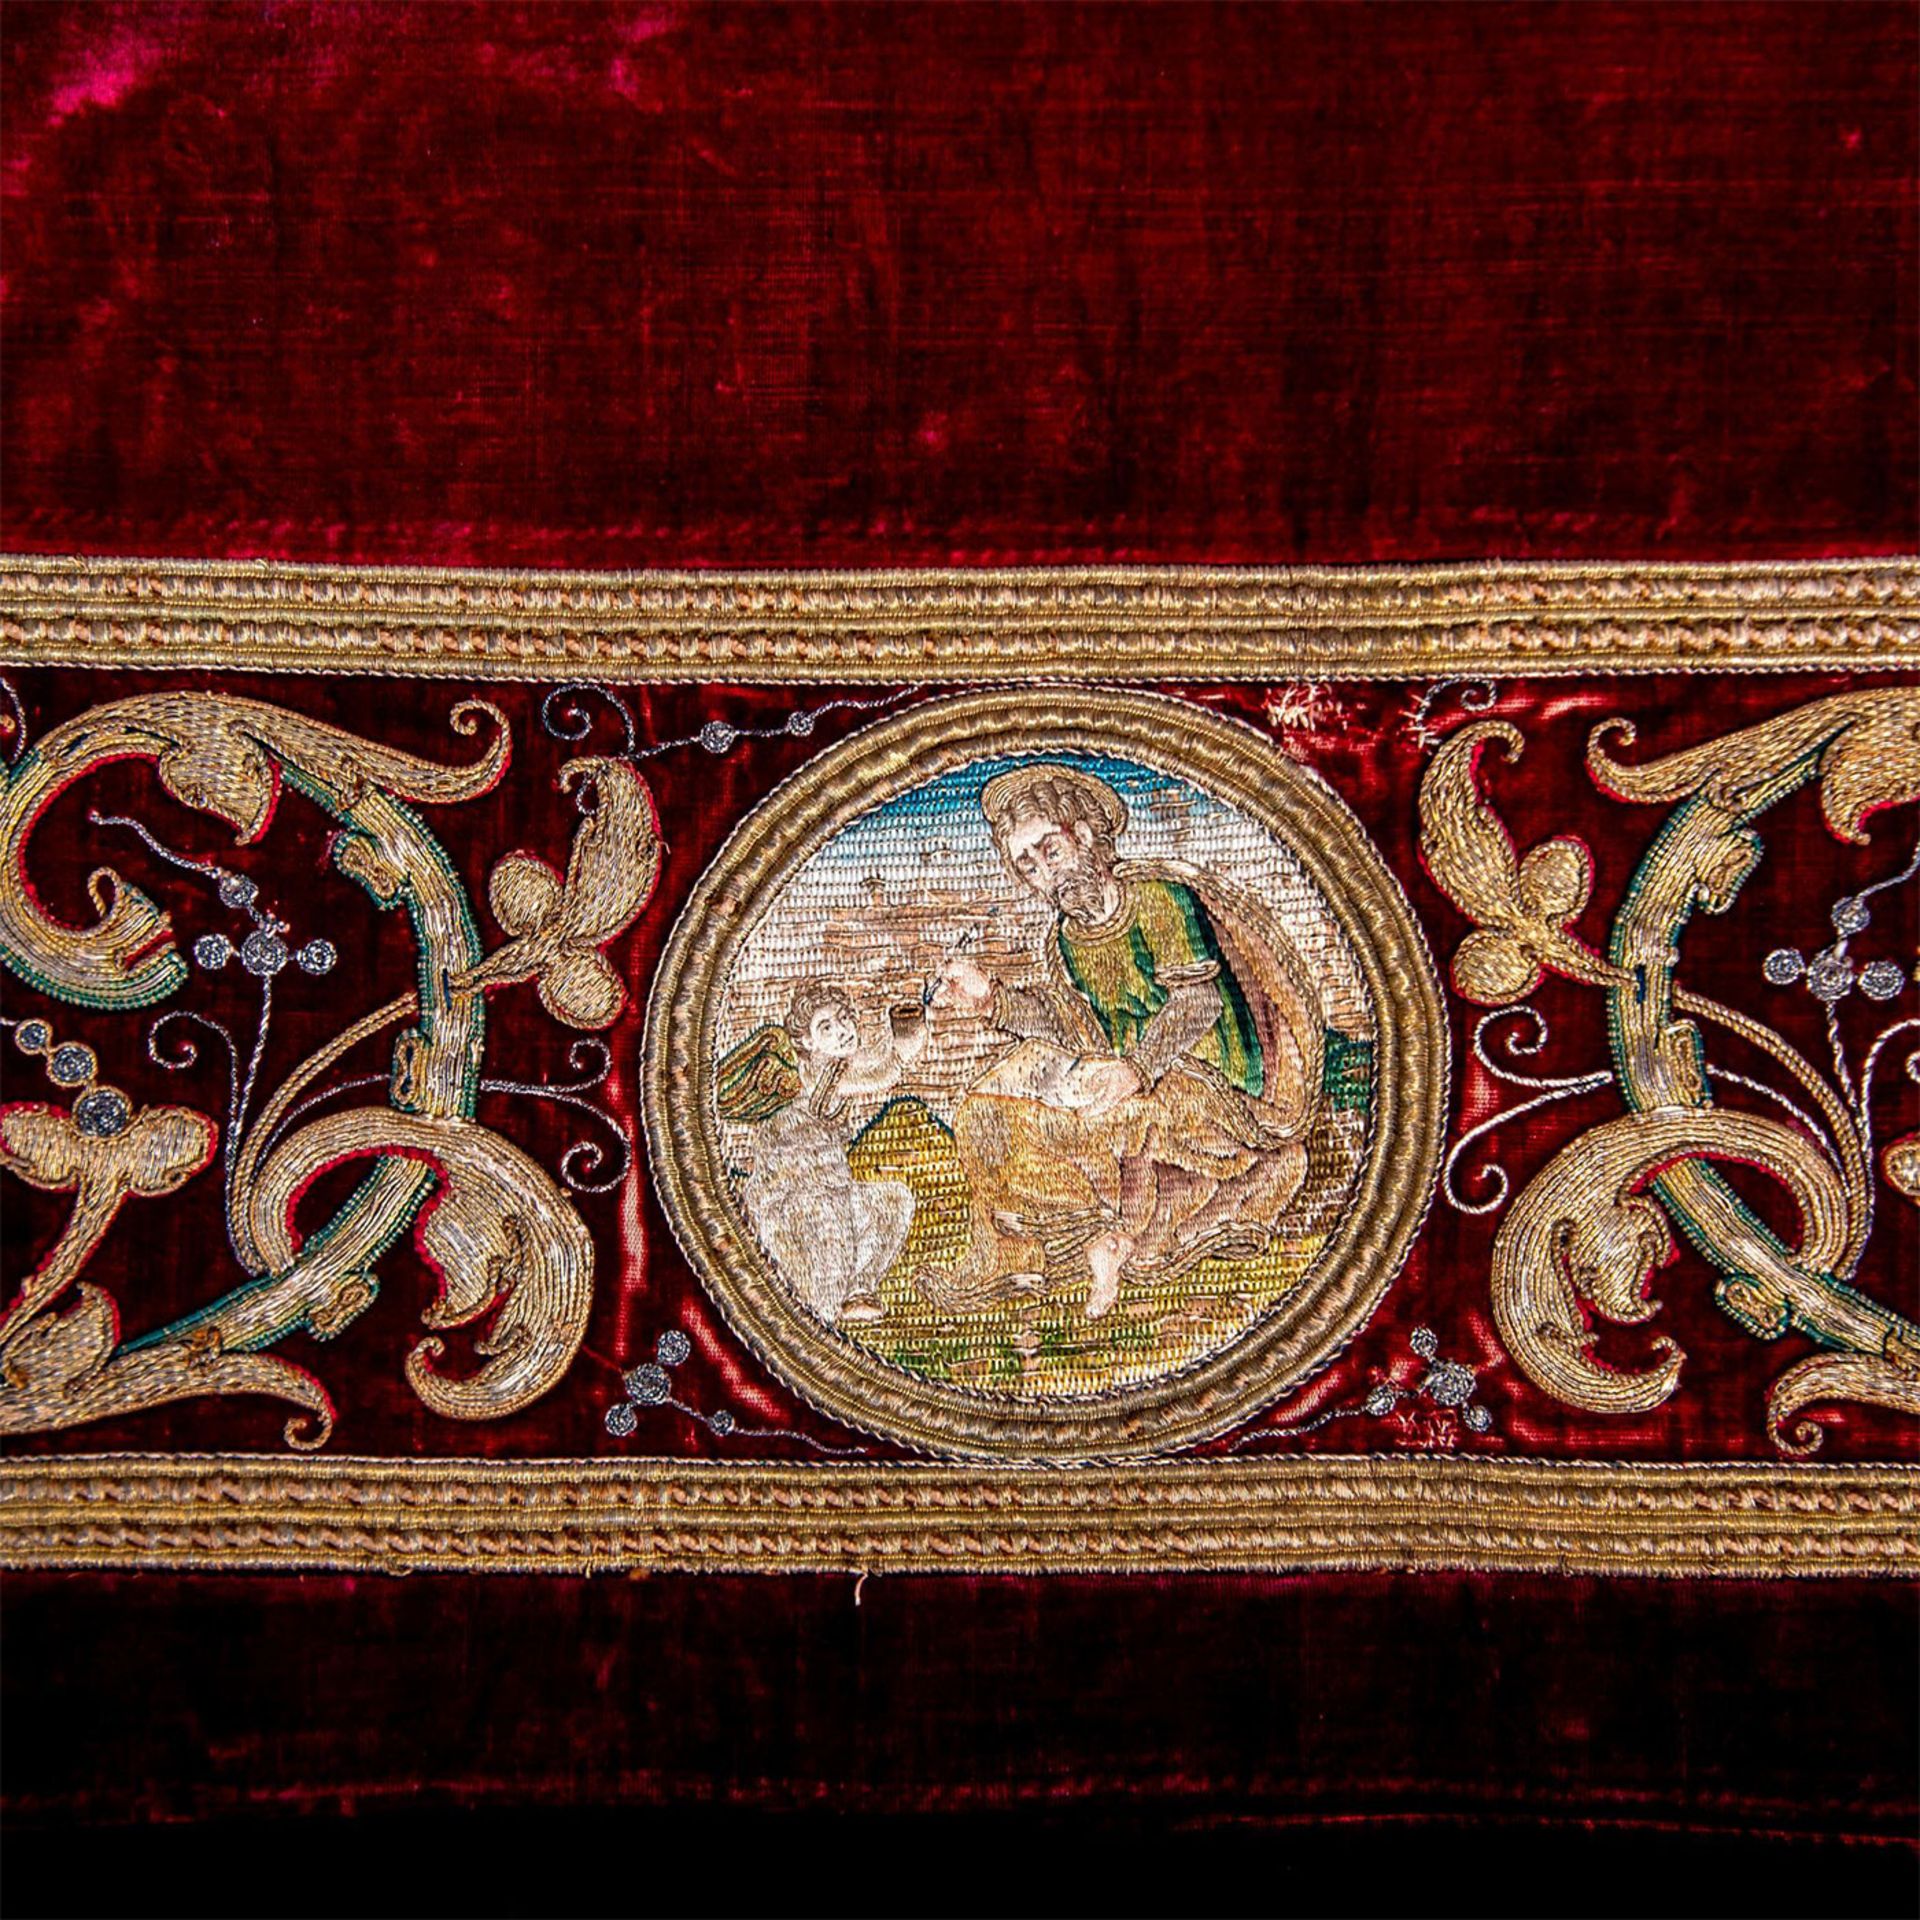 16th Century European Embroidered Wall Hanging - Image 3 of 6